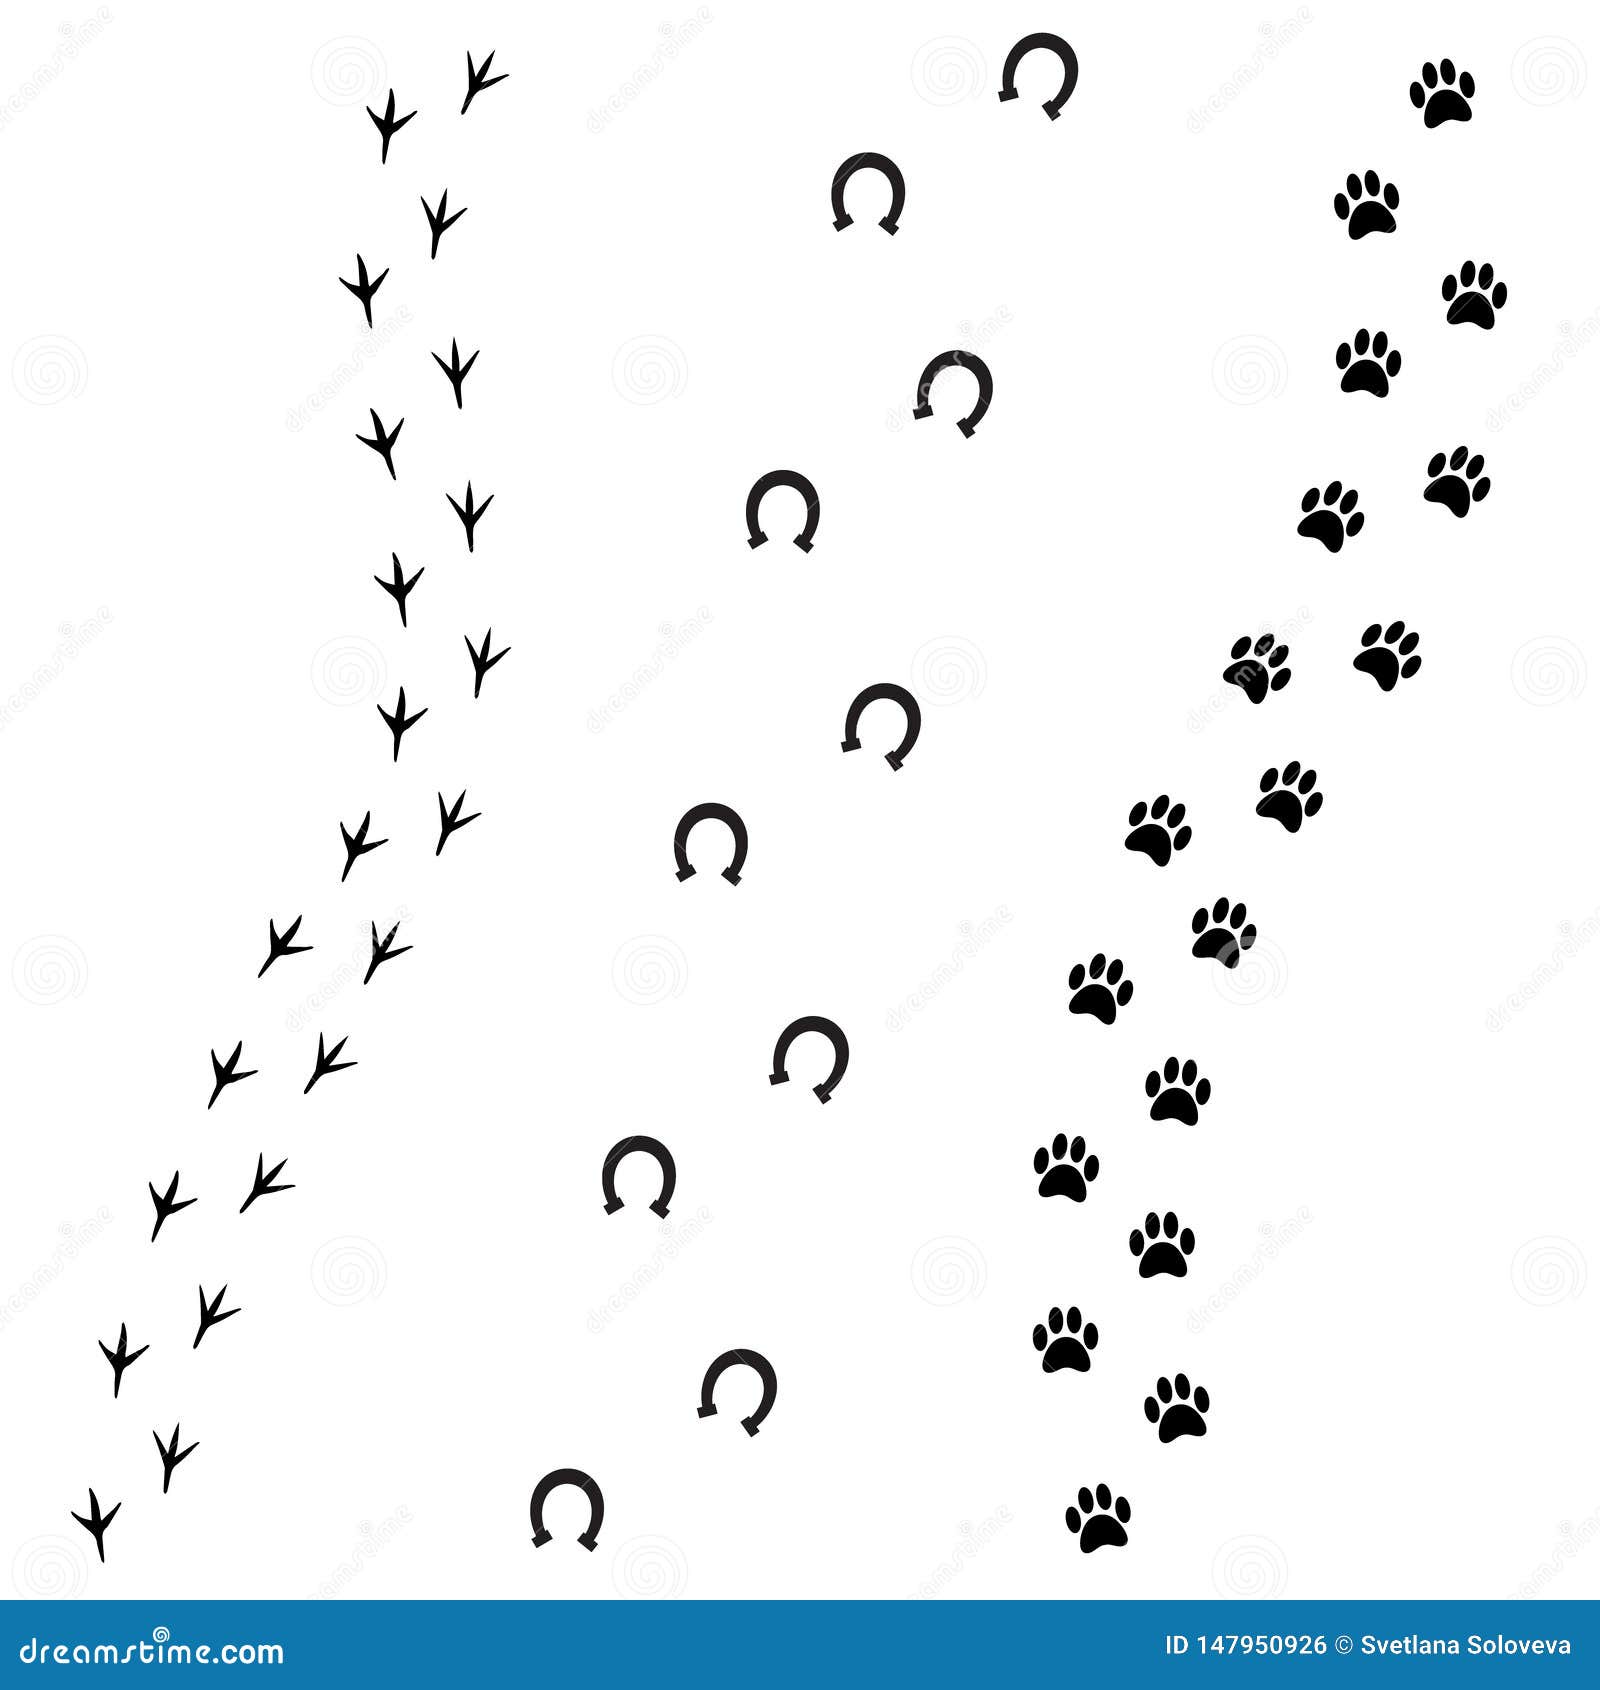  black foot prints of dog horse and bird